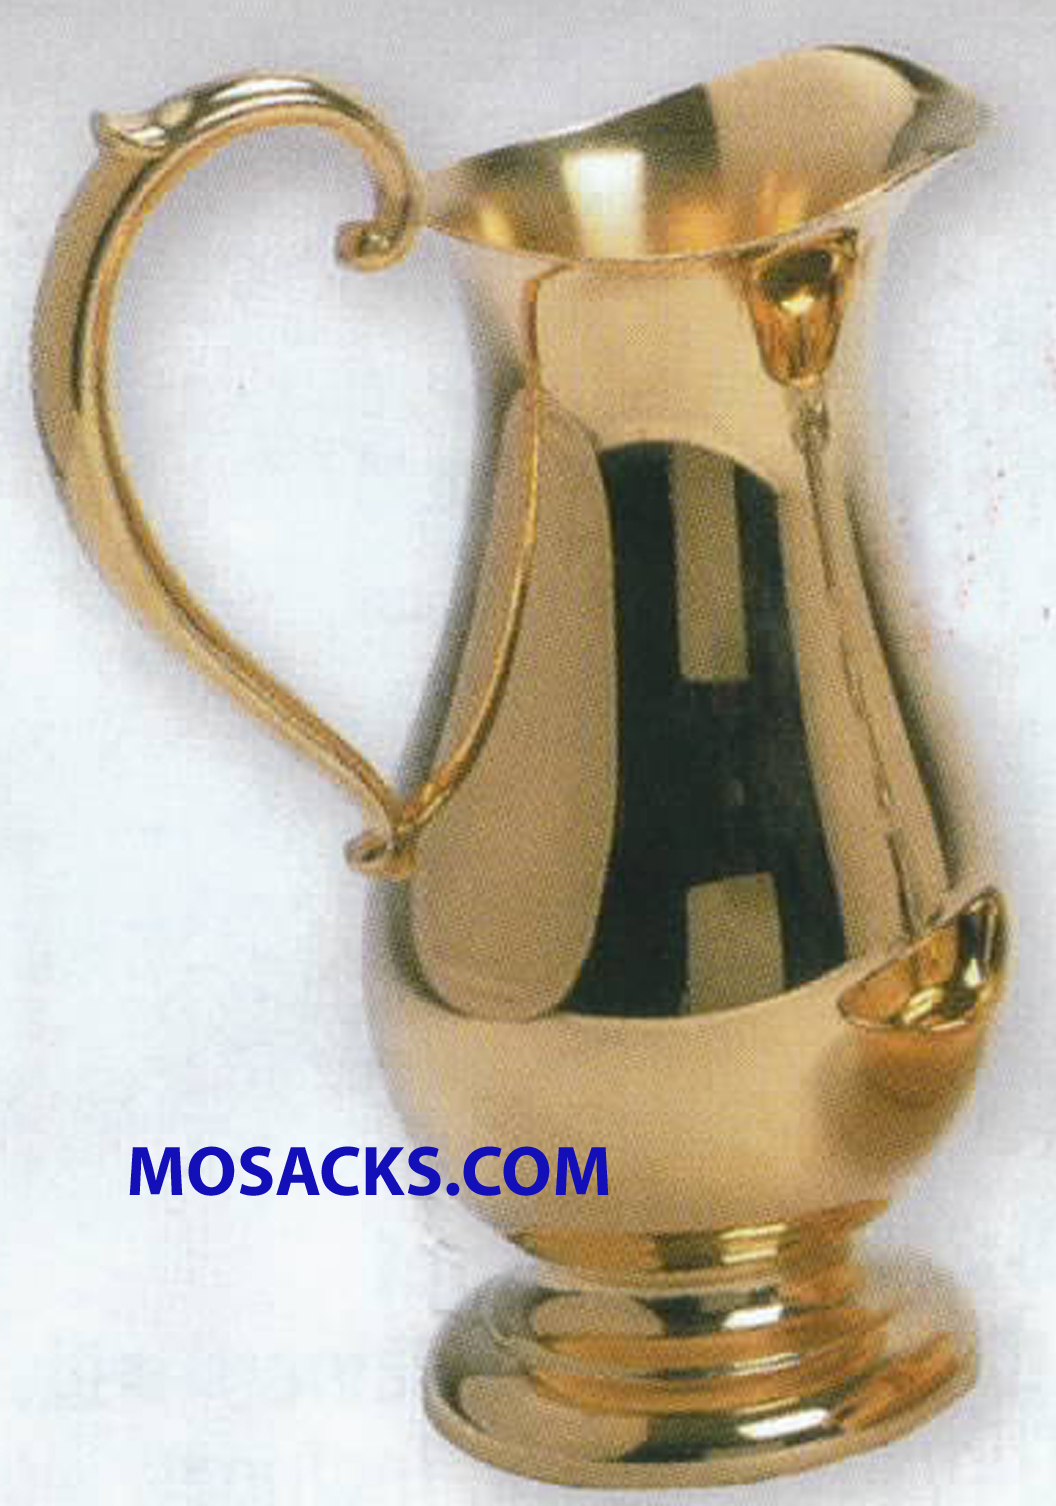 FREE SHIPPING Kbrand 8 Inch Gold Plated Pewter Ewer-K217, Baptismal Pitcher